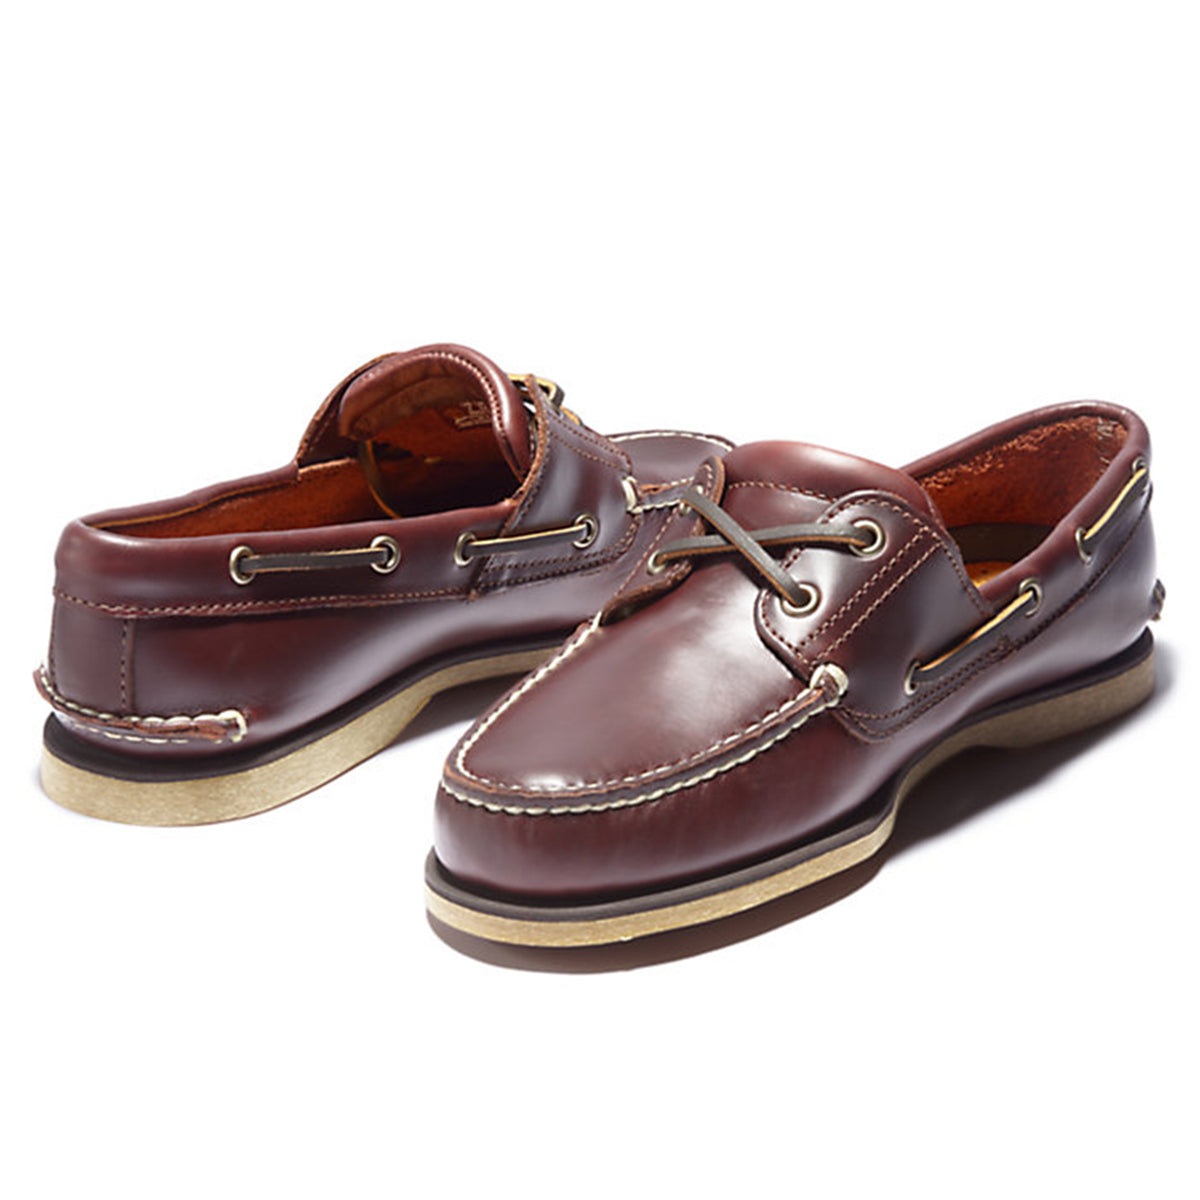 Timberland Classic Boat Shoe - 25077 Rootbeer